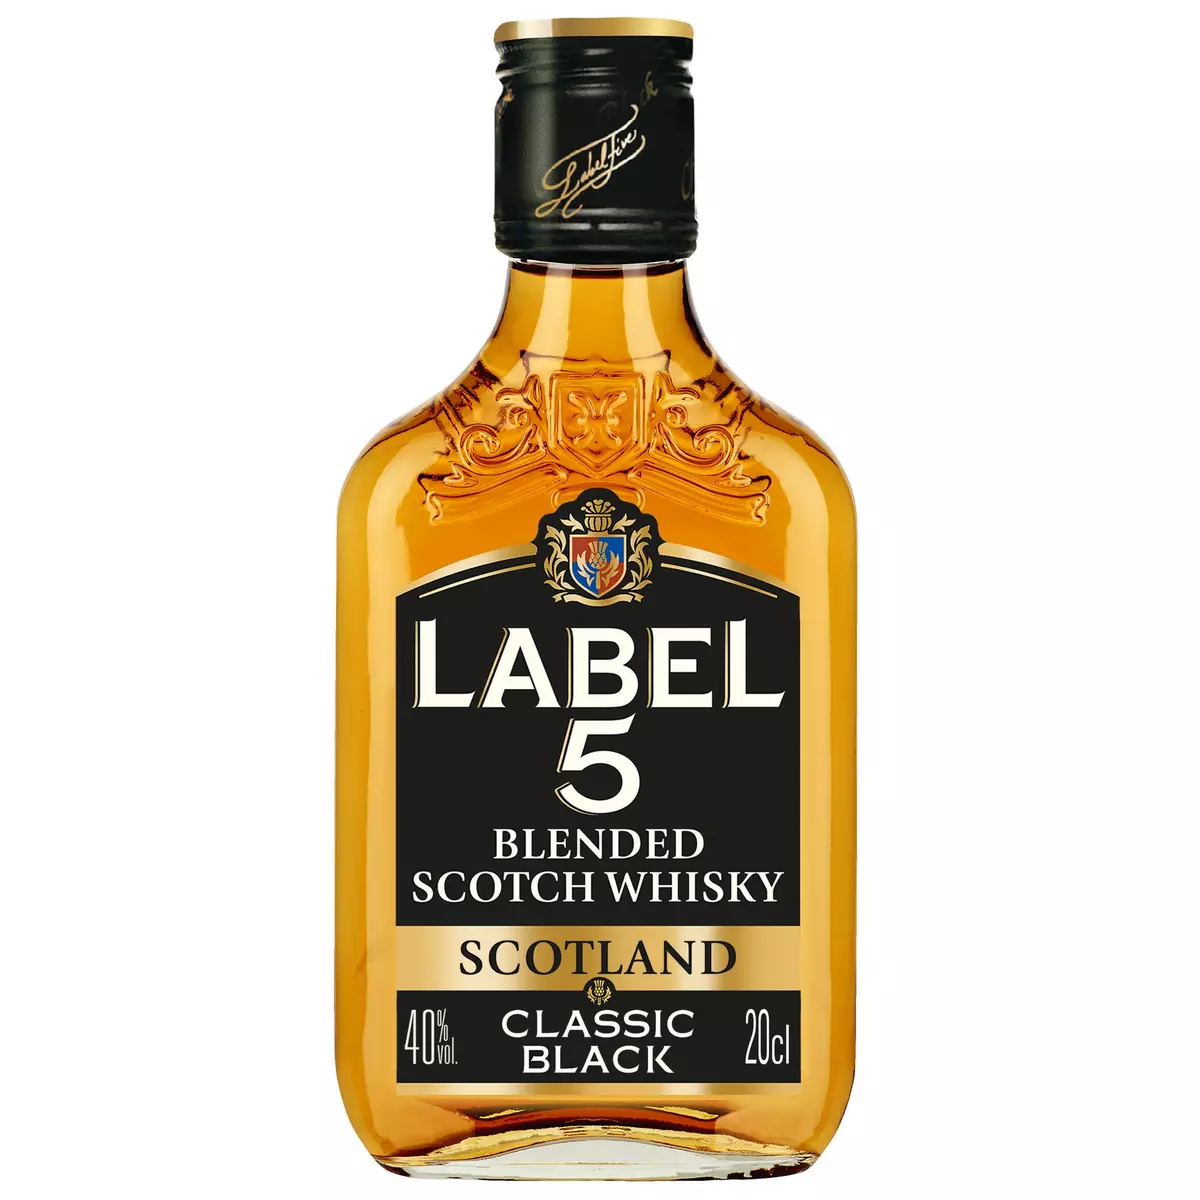 LABEL 5 Scotch whisky blended classic black flask 40% 20cl